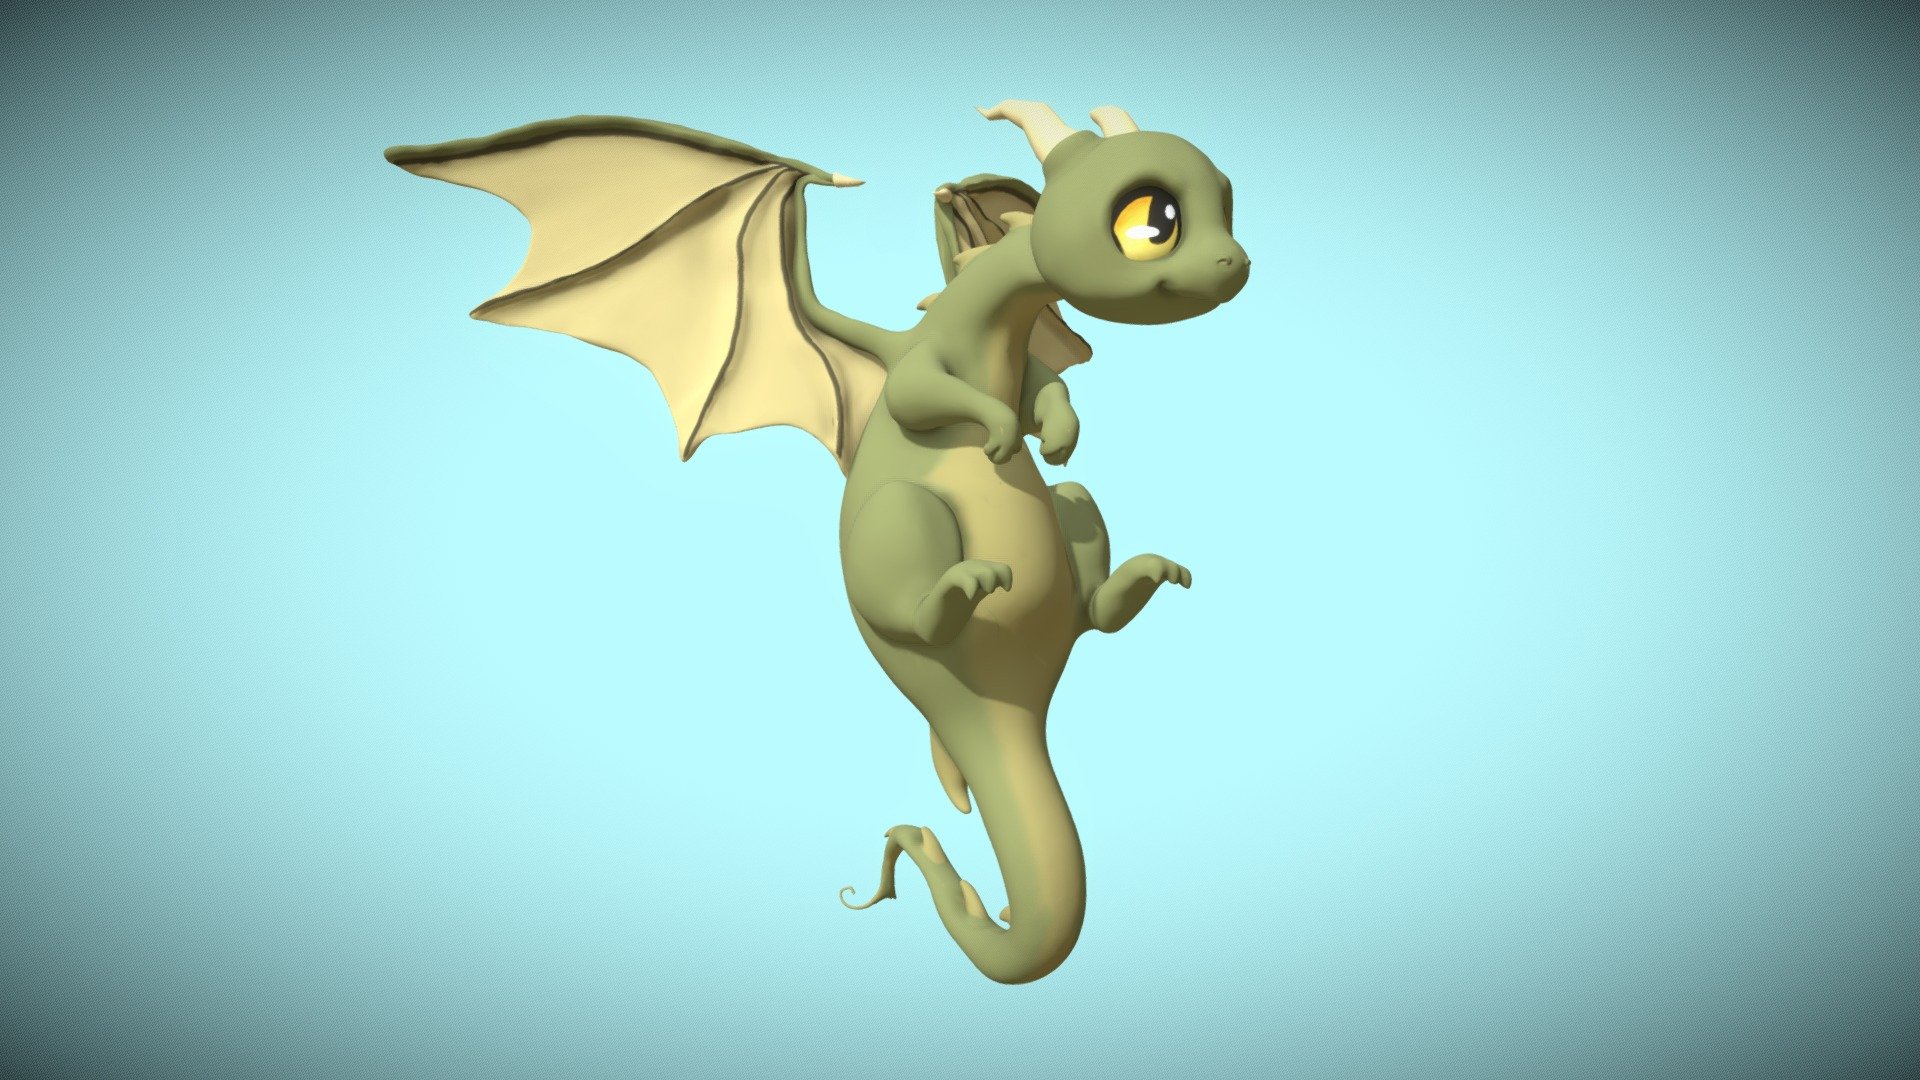 This is Drema, a cute dragon I threw together. Decided to work on forms a bit, and throw on Anime-style eyes for a change.

Credit for the concept art goes to Naomi Lord Art! - Drema the Dragon - 3D model by David Sap (@davidjsap) 3d model